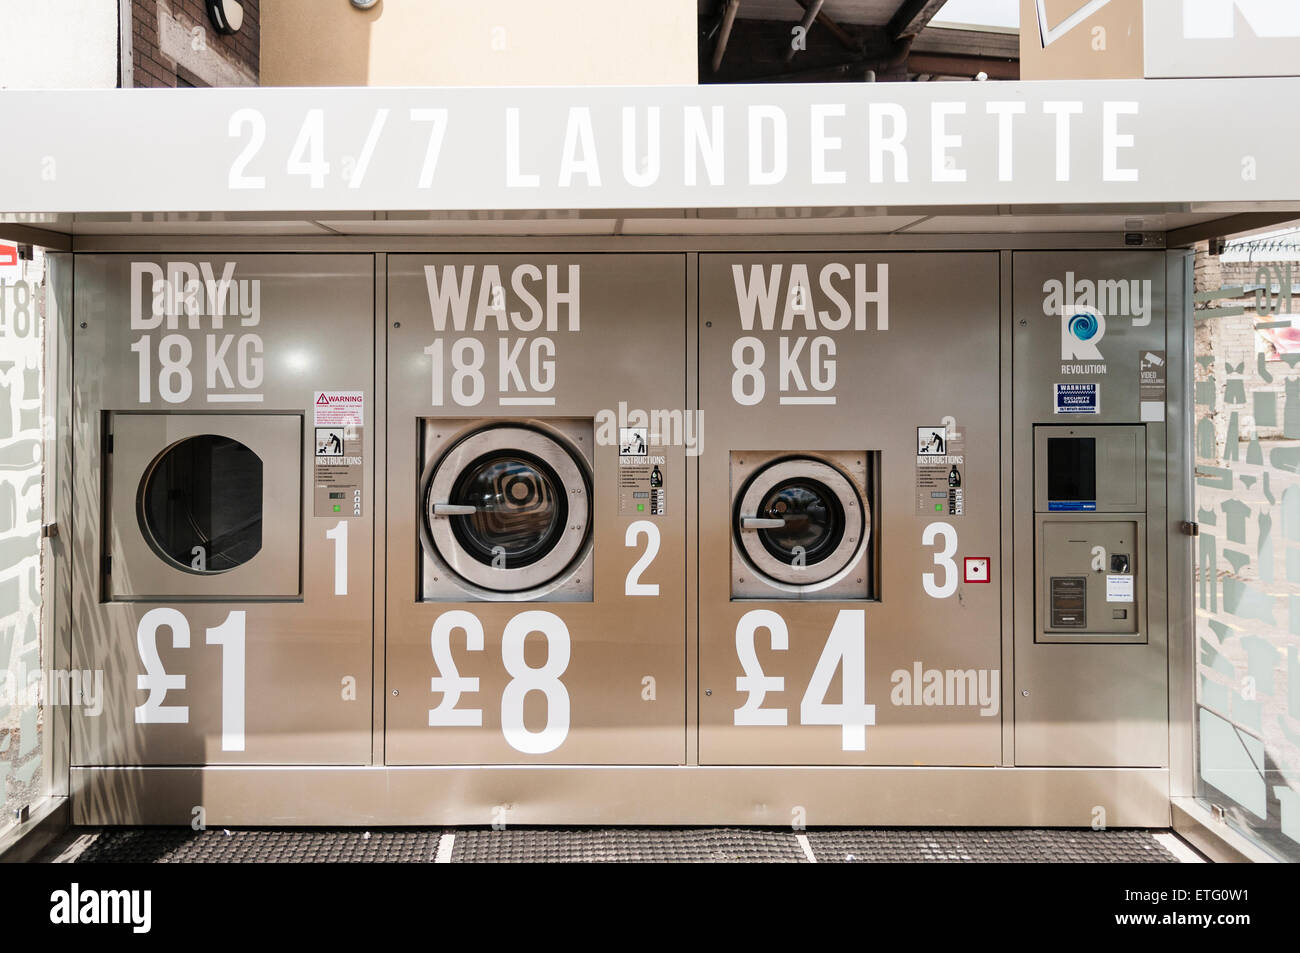 Automatic outdoor launderette allowing people to dry and wash clothes. Stock Photo